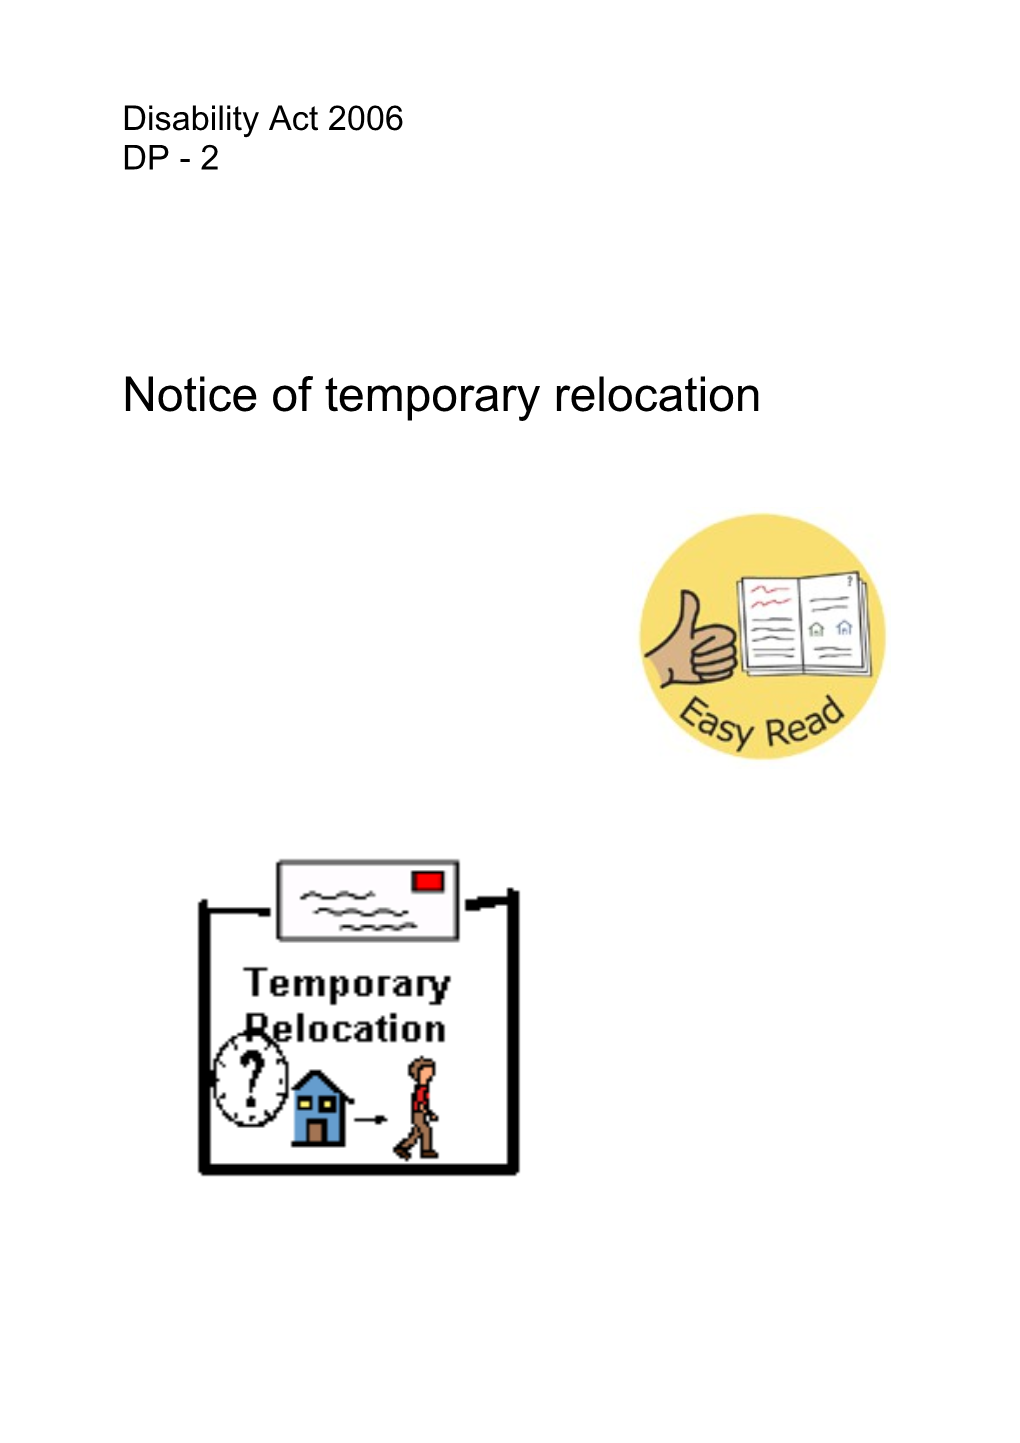 Disability Act 2006 Notice of Temporary Relocation